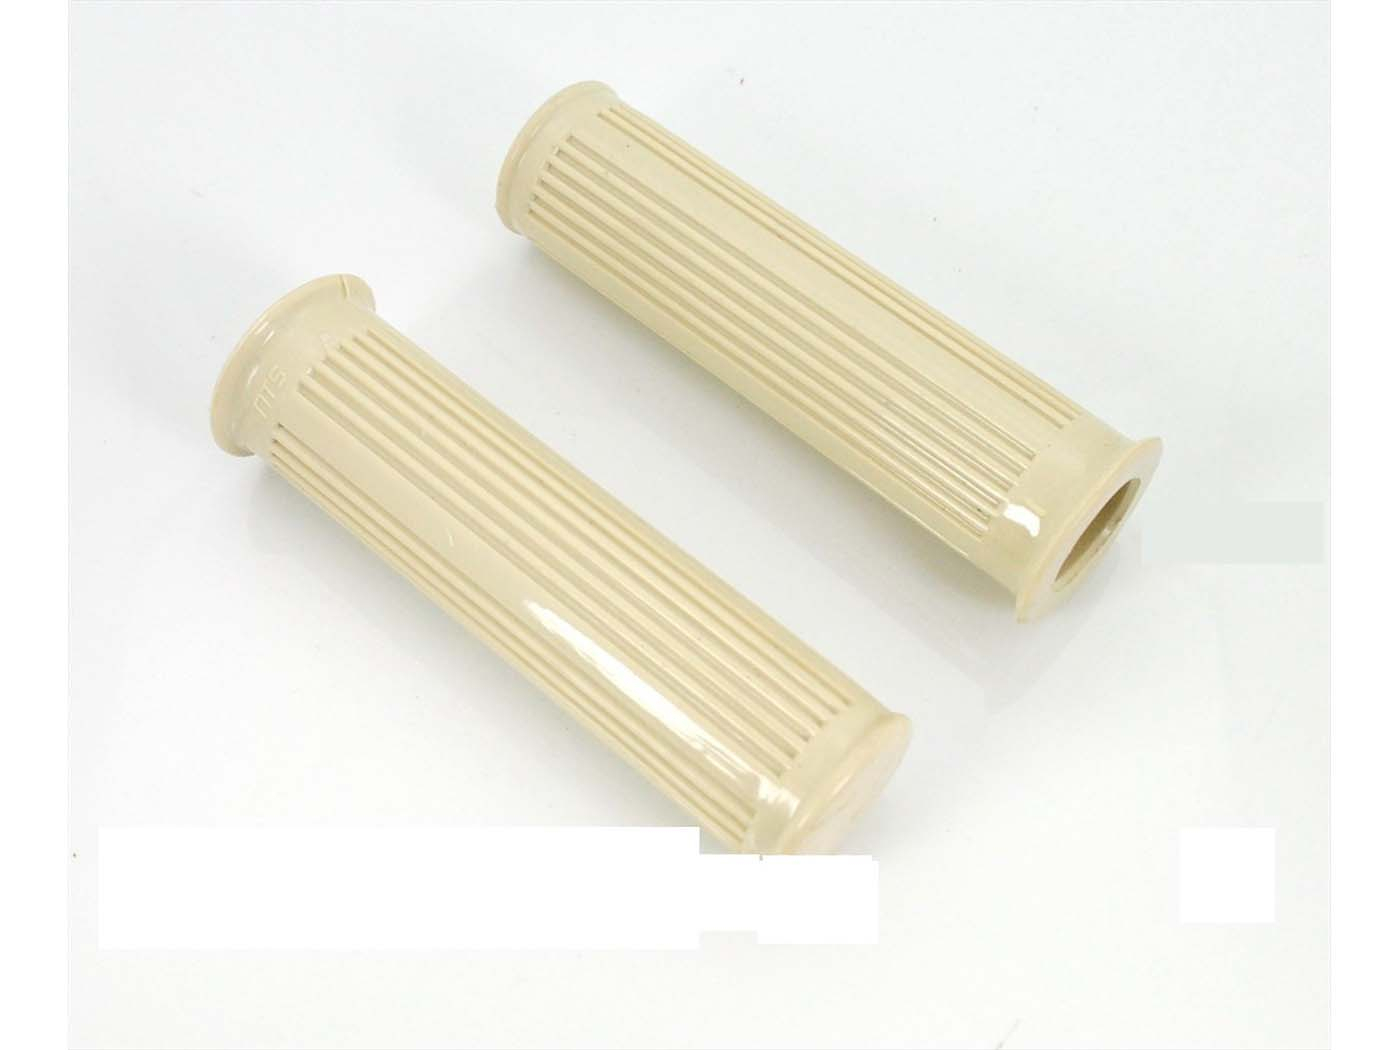 Handle Set Moped 2 Pieces Width 120mm Inner Diameter 22/22mm Color Cream White For Puch DS 50